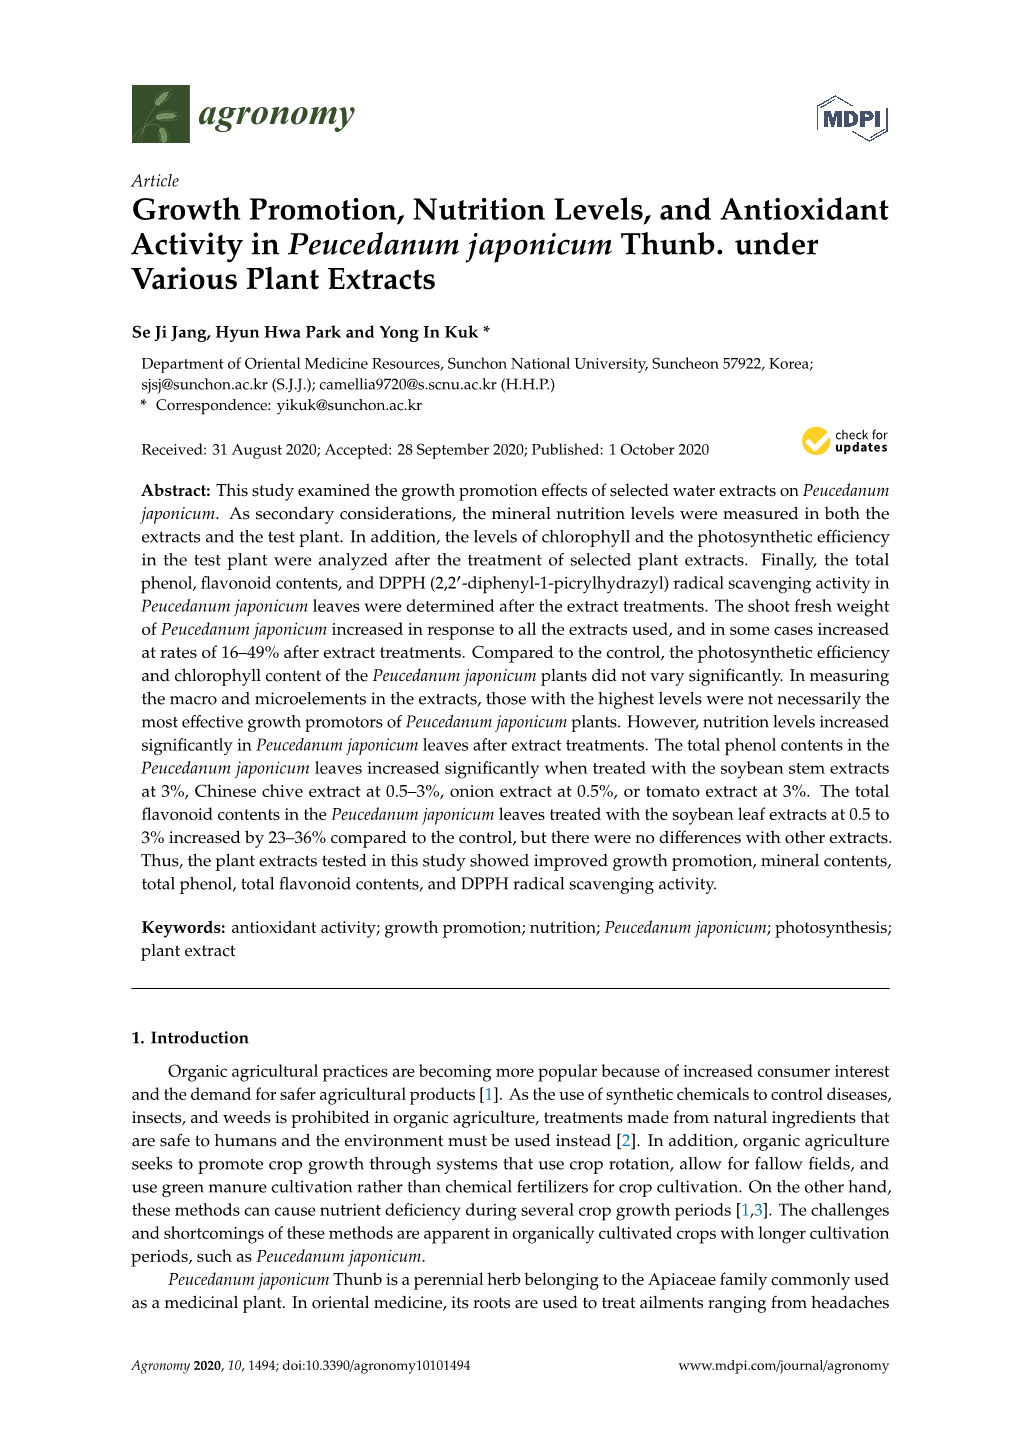 Growth Promotion, Nutrition Levels, and Antioxidant Activity in Peucedanum Japonicum Thunb